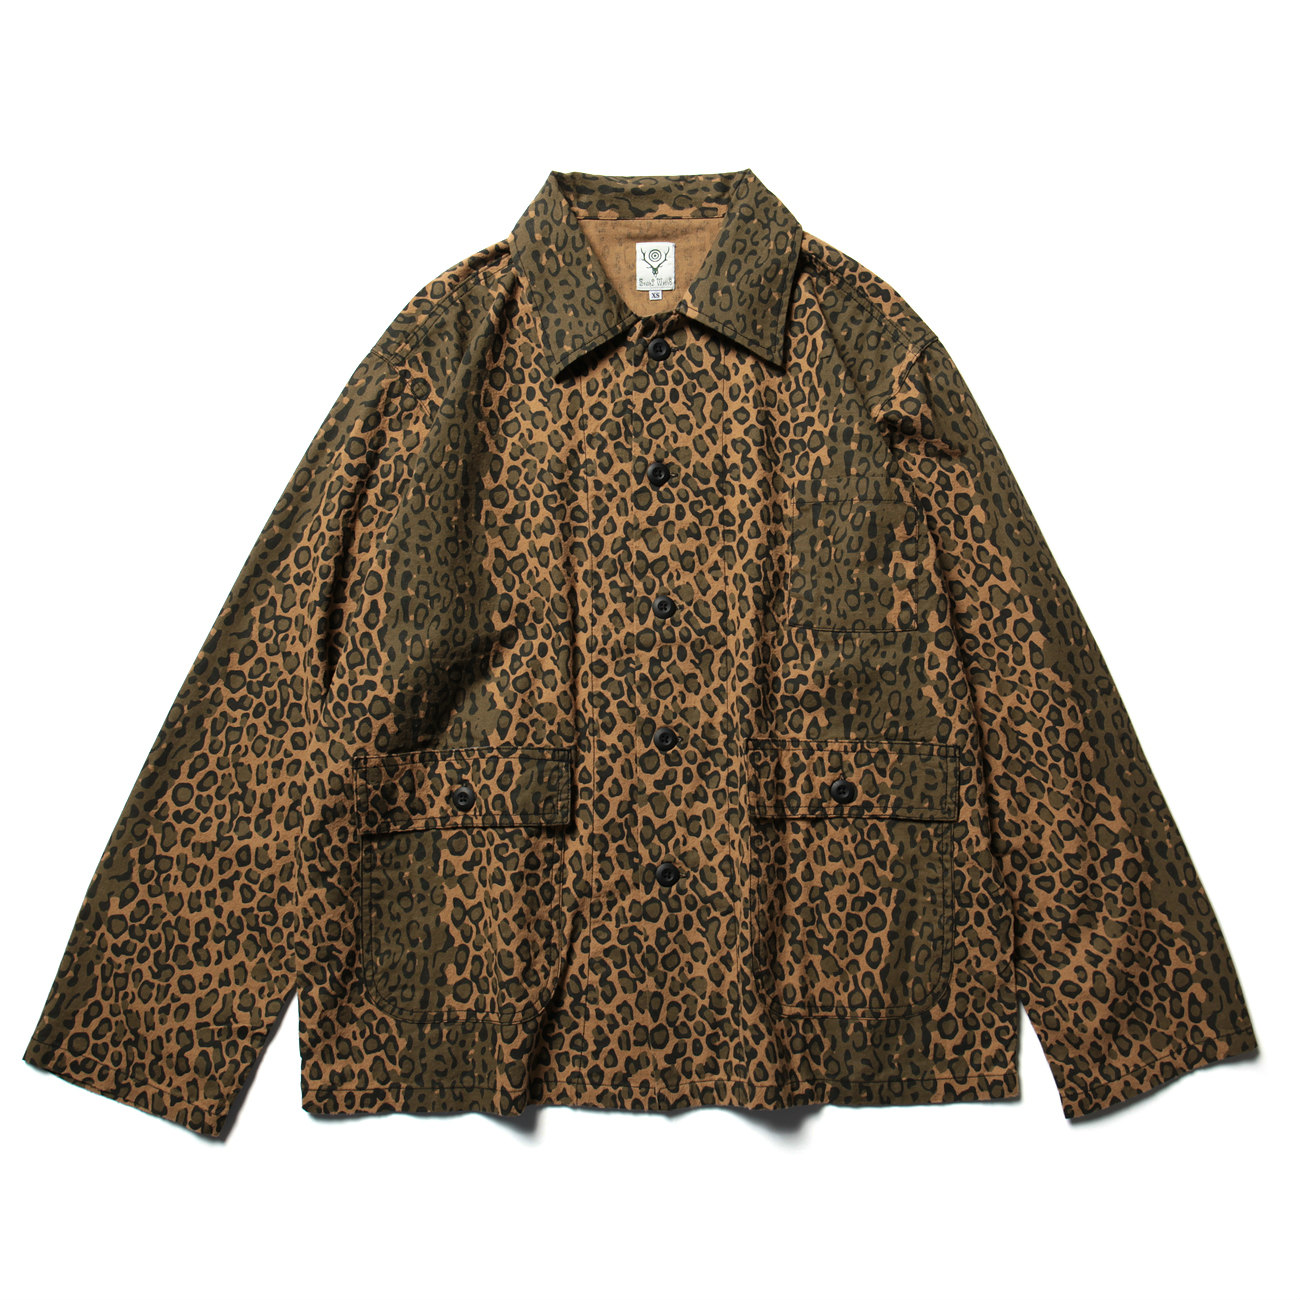 South2 West8 / サウスツーウエストエイト | Hunting Shirt - Flannel